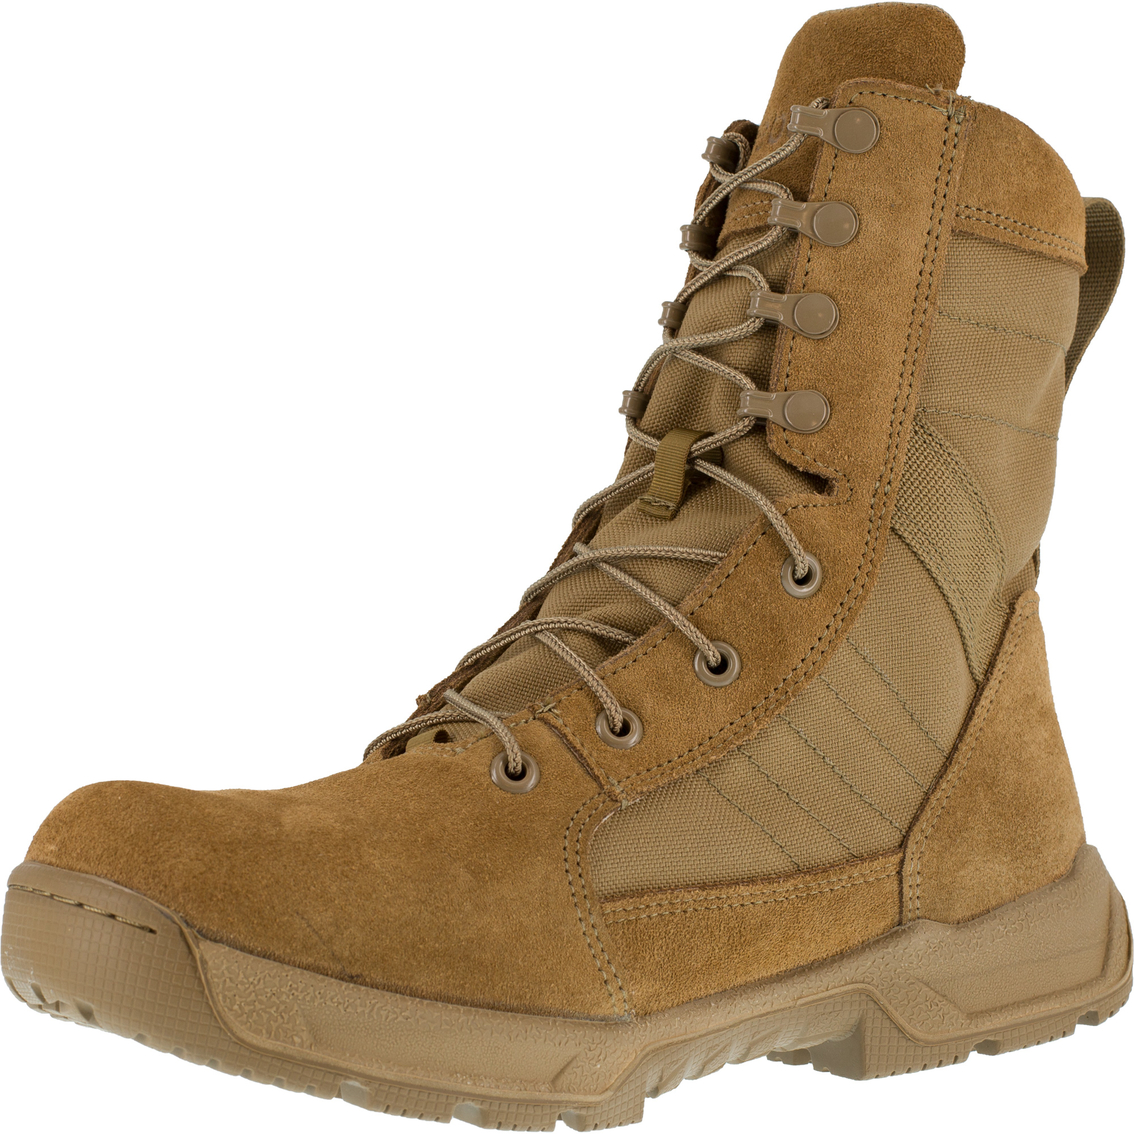 Reebok Strikepoint U.S. CM8940 8 in. Ultra Light Performance Military Boots - Image 4 of 5